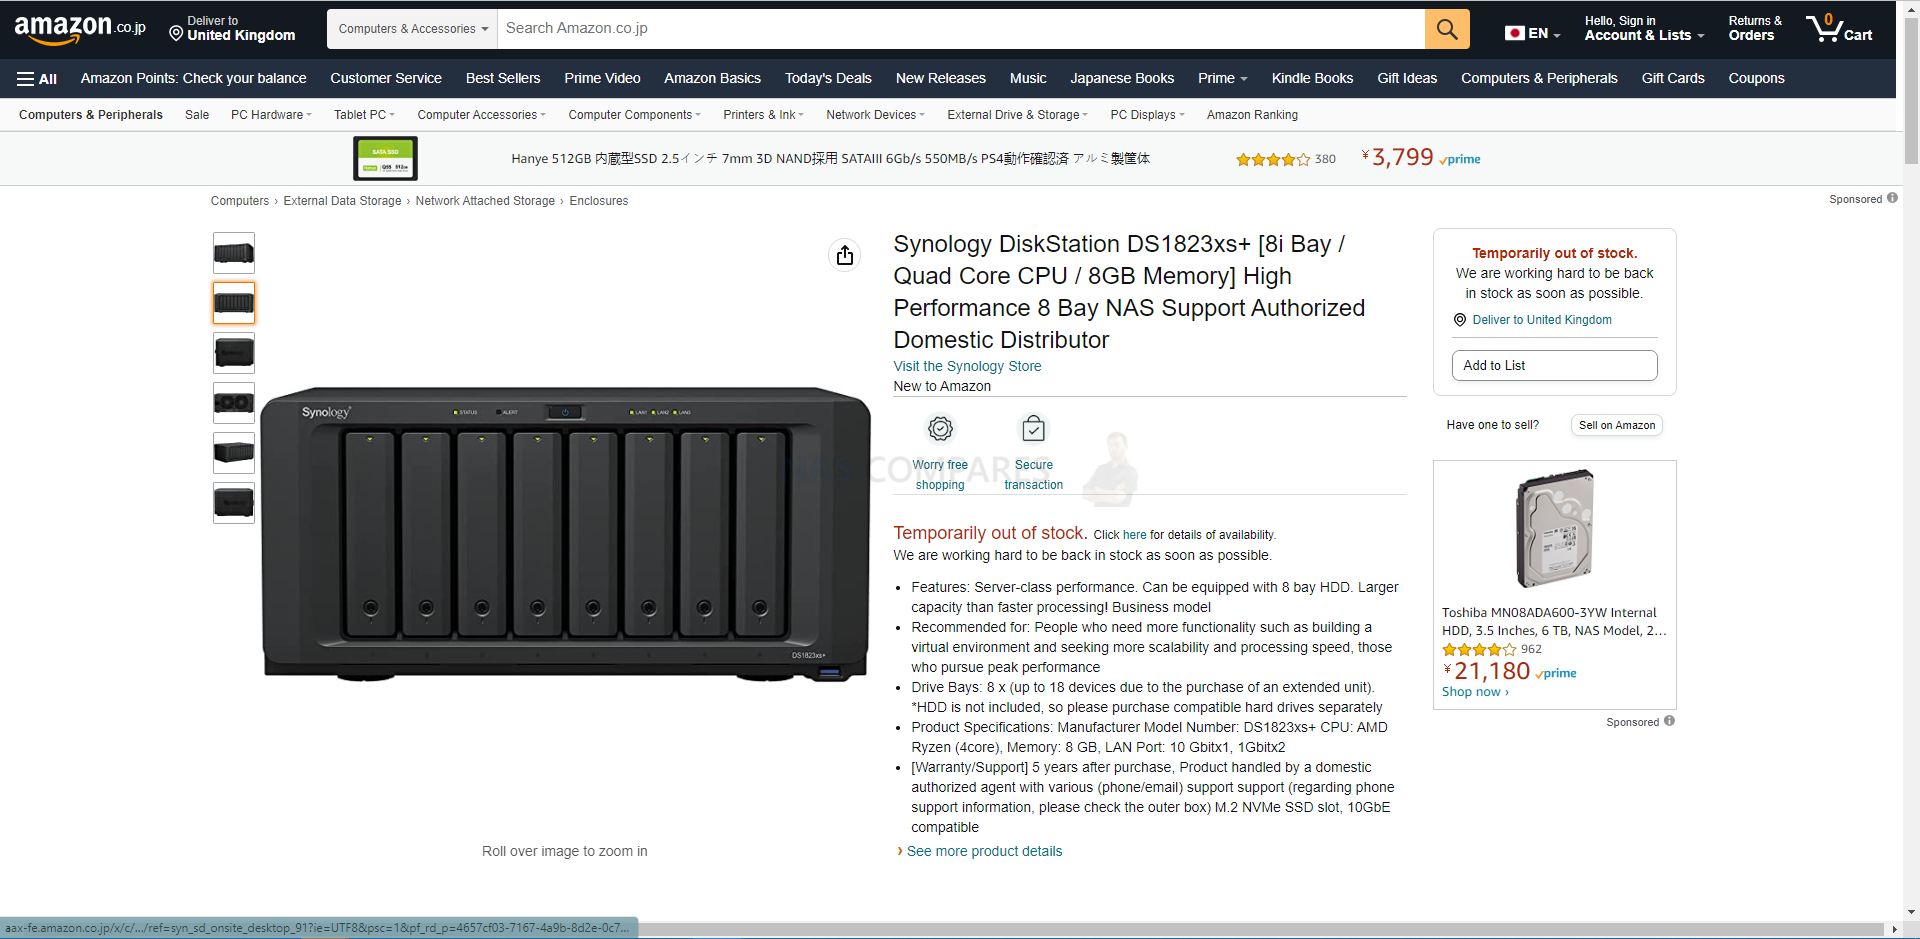 Synology DiskStation DS1823xs+ review: A powerful eight-bay NAS at a  reasonable price